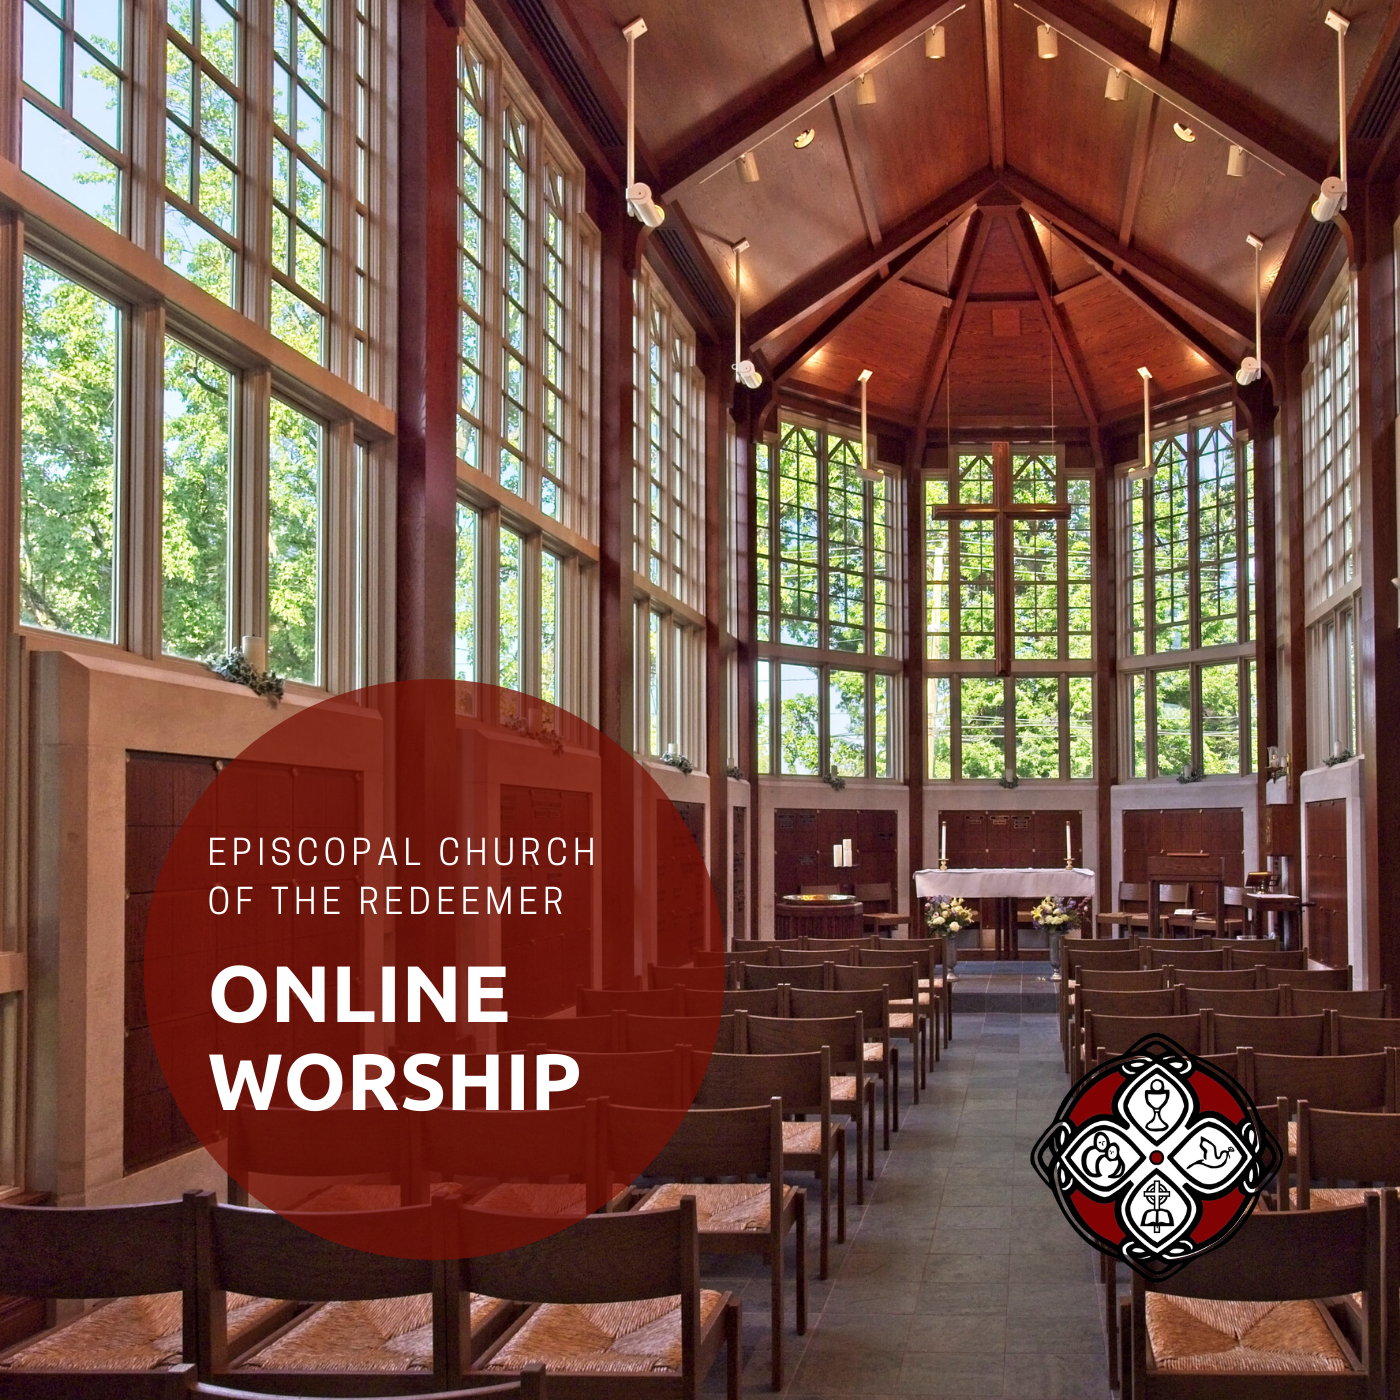 Online Worship at the Episcopal Church of the Redeemer